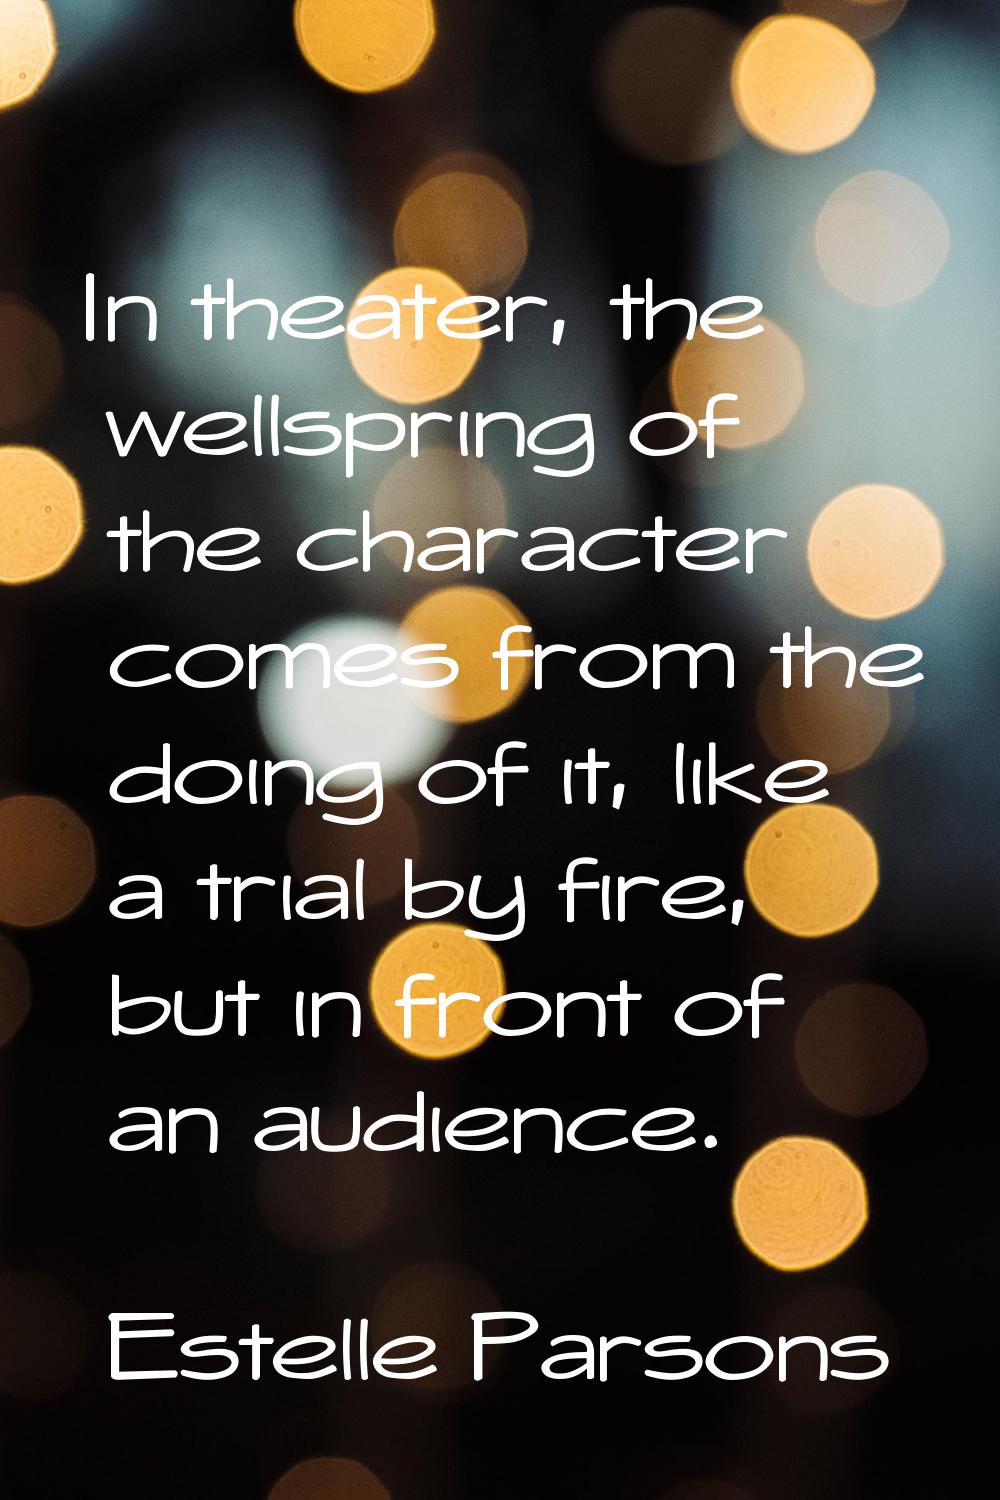 In theater, the wellspring of the character comes from the doing of it, like a trial by fire, but i